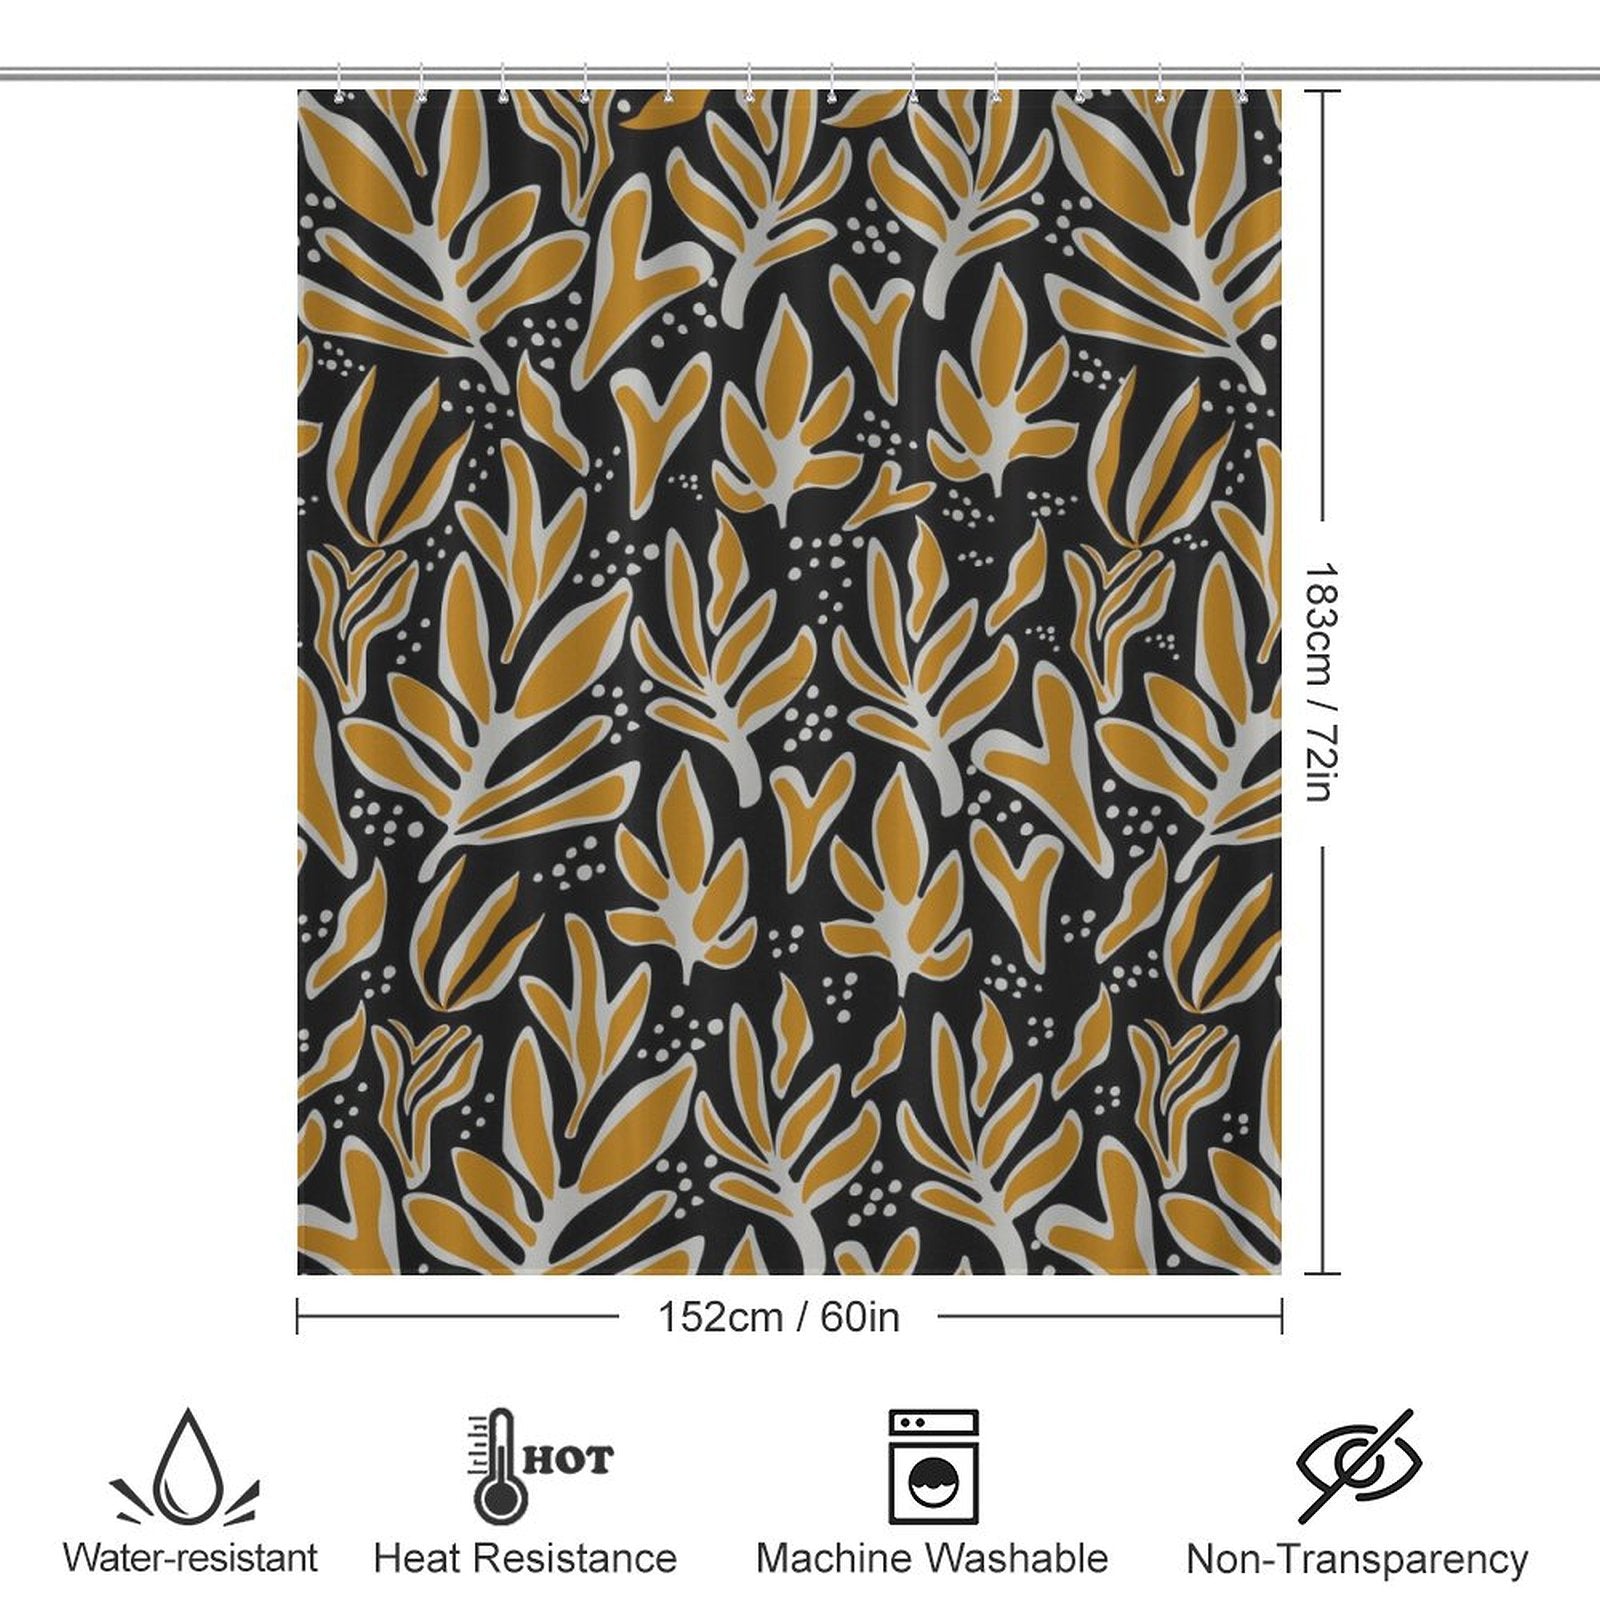 The Cotton Cat Abstract Vintage Boho Yellow Leaves Art Mid Century Leaf Shower Curtain-Cottoncat features a yellow and white mid-century leaf pattern on a dark background, measuring 183 cm by 152 cm. It is water-resistant, heat resistant, machine washable, and non-transparent.